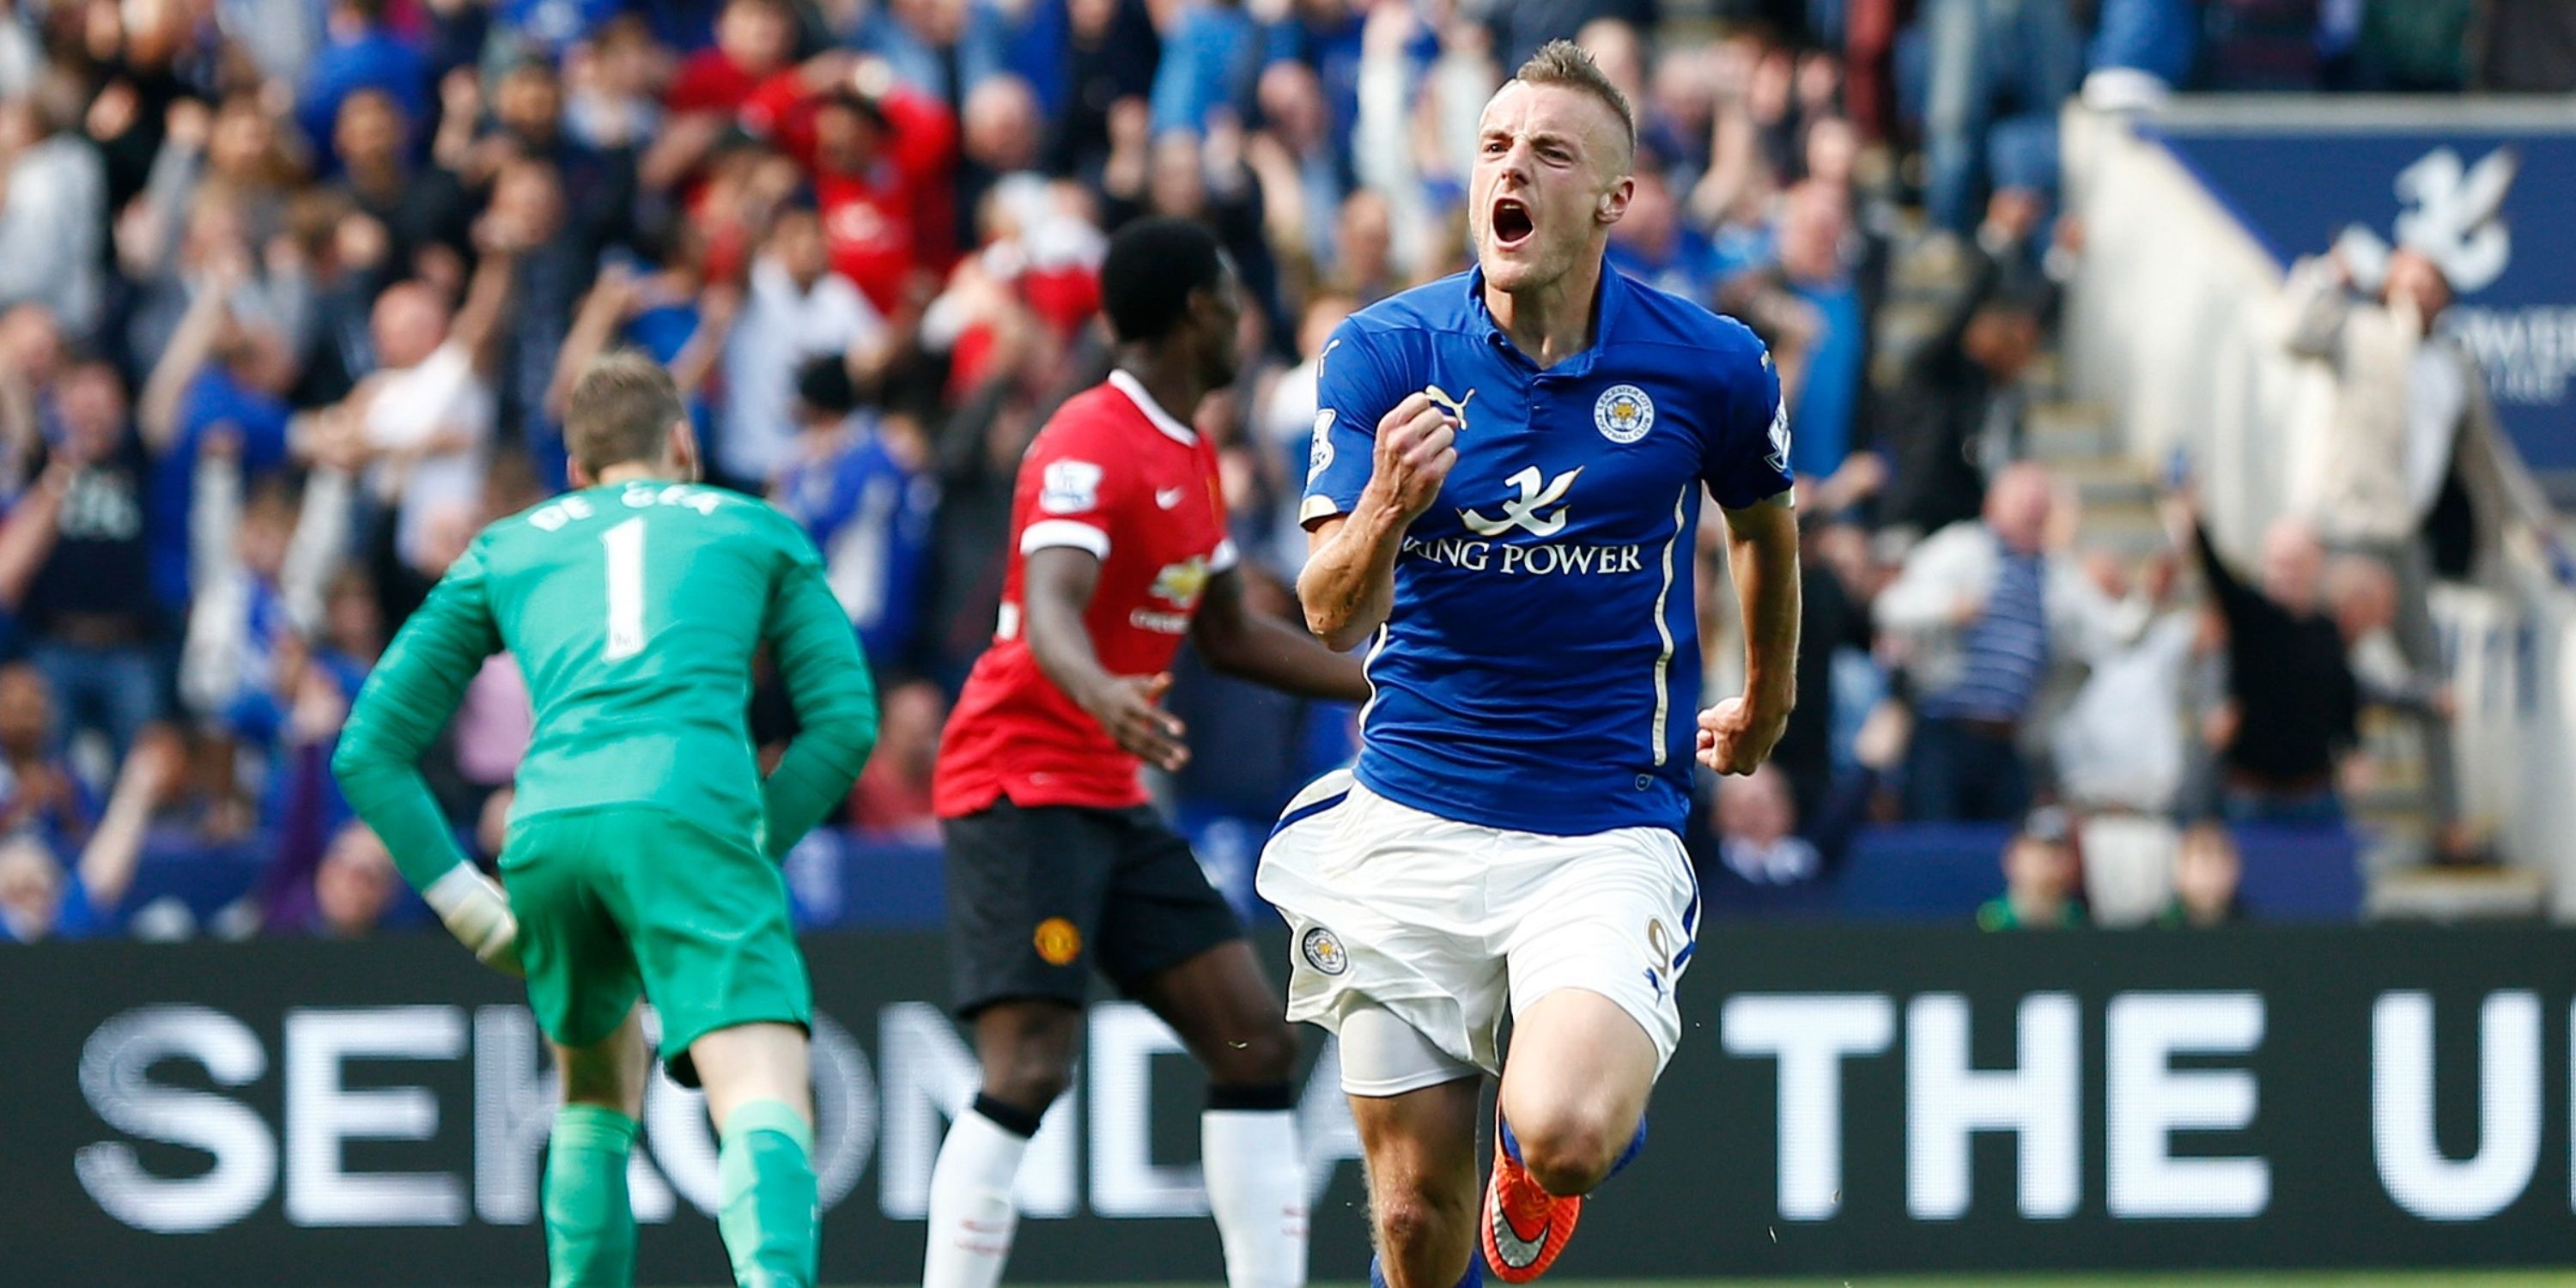 Jamie Vardy celebrating for Leicester City.